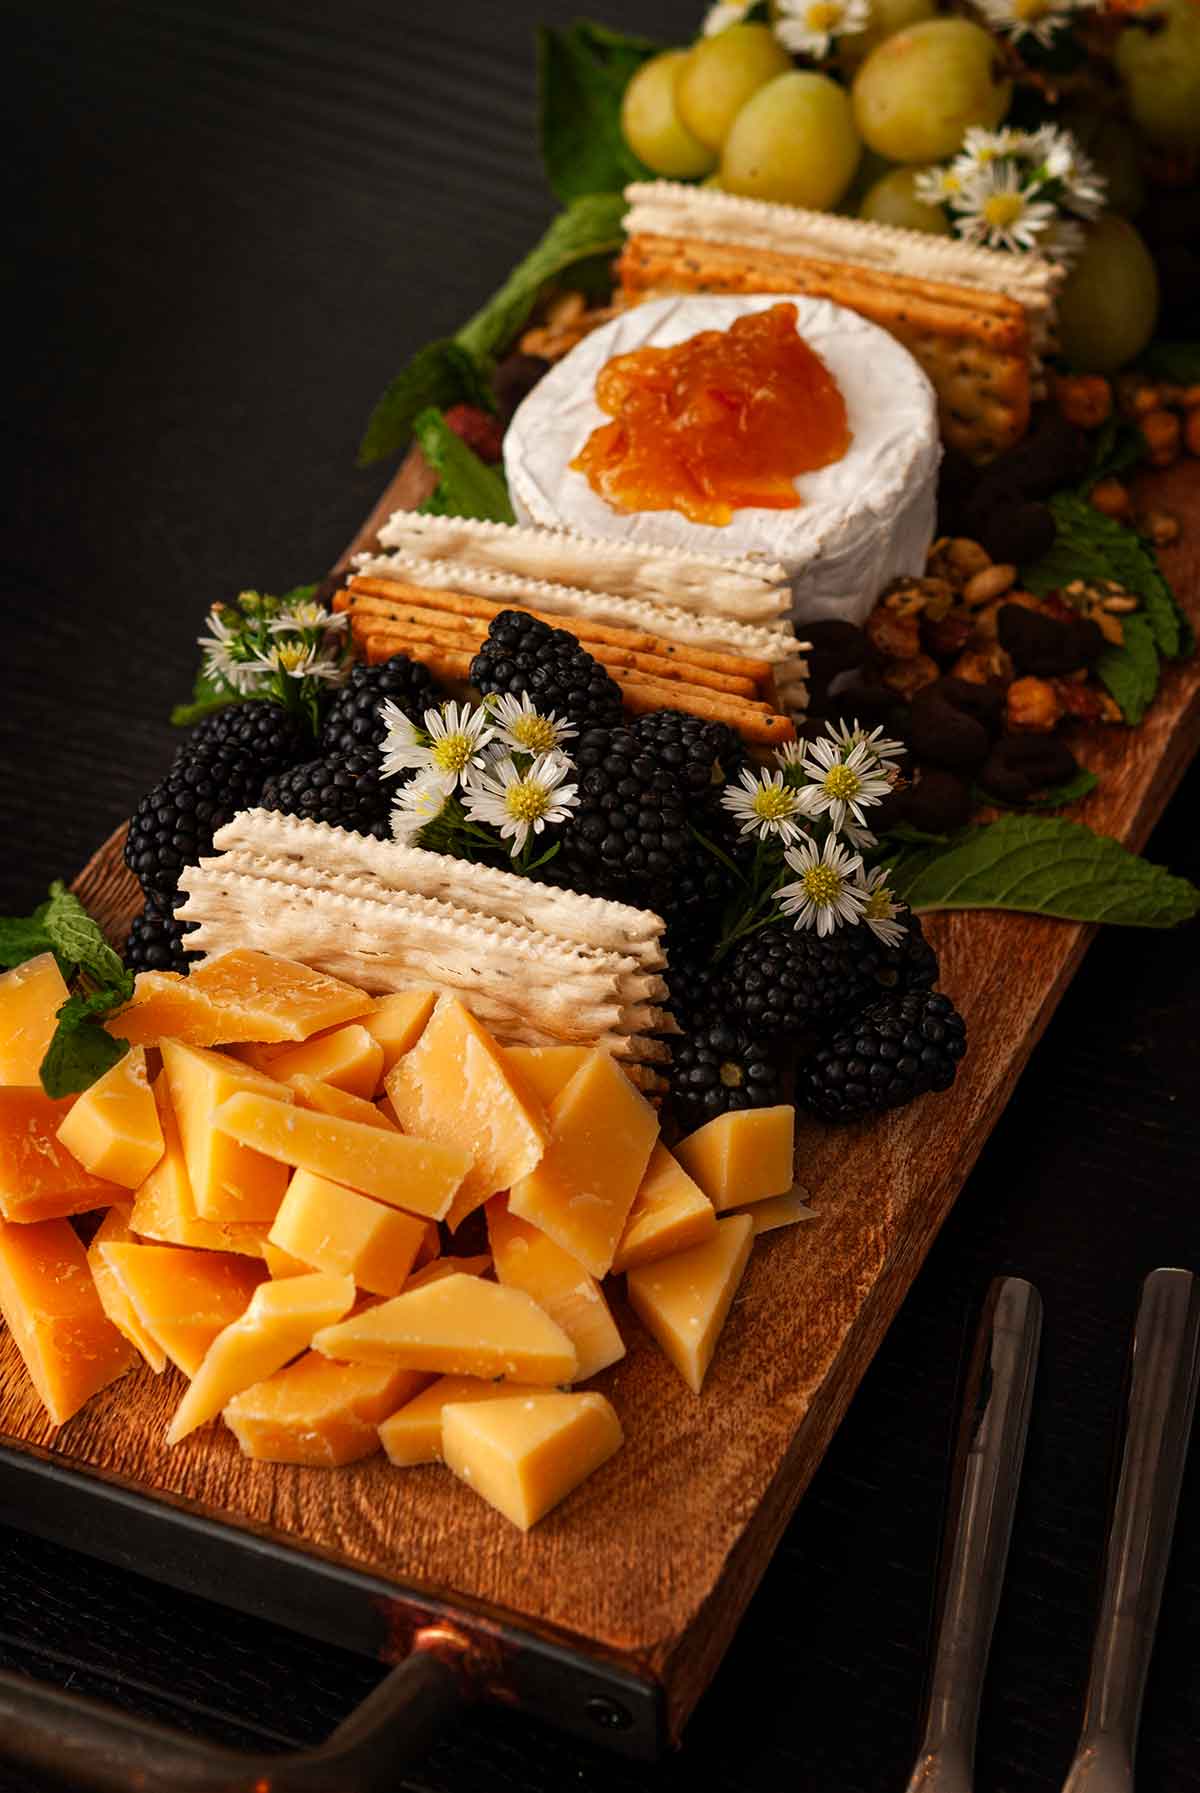 An ornate cheeseboard with 2 cheeses, berries, grapes, crackers and flowers.